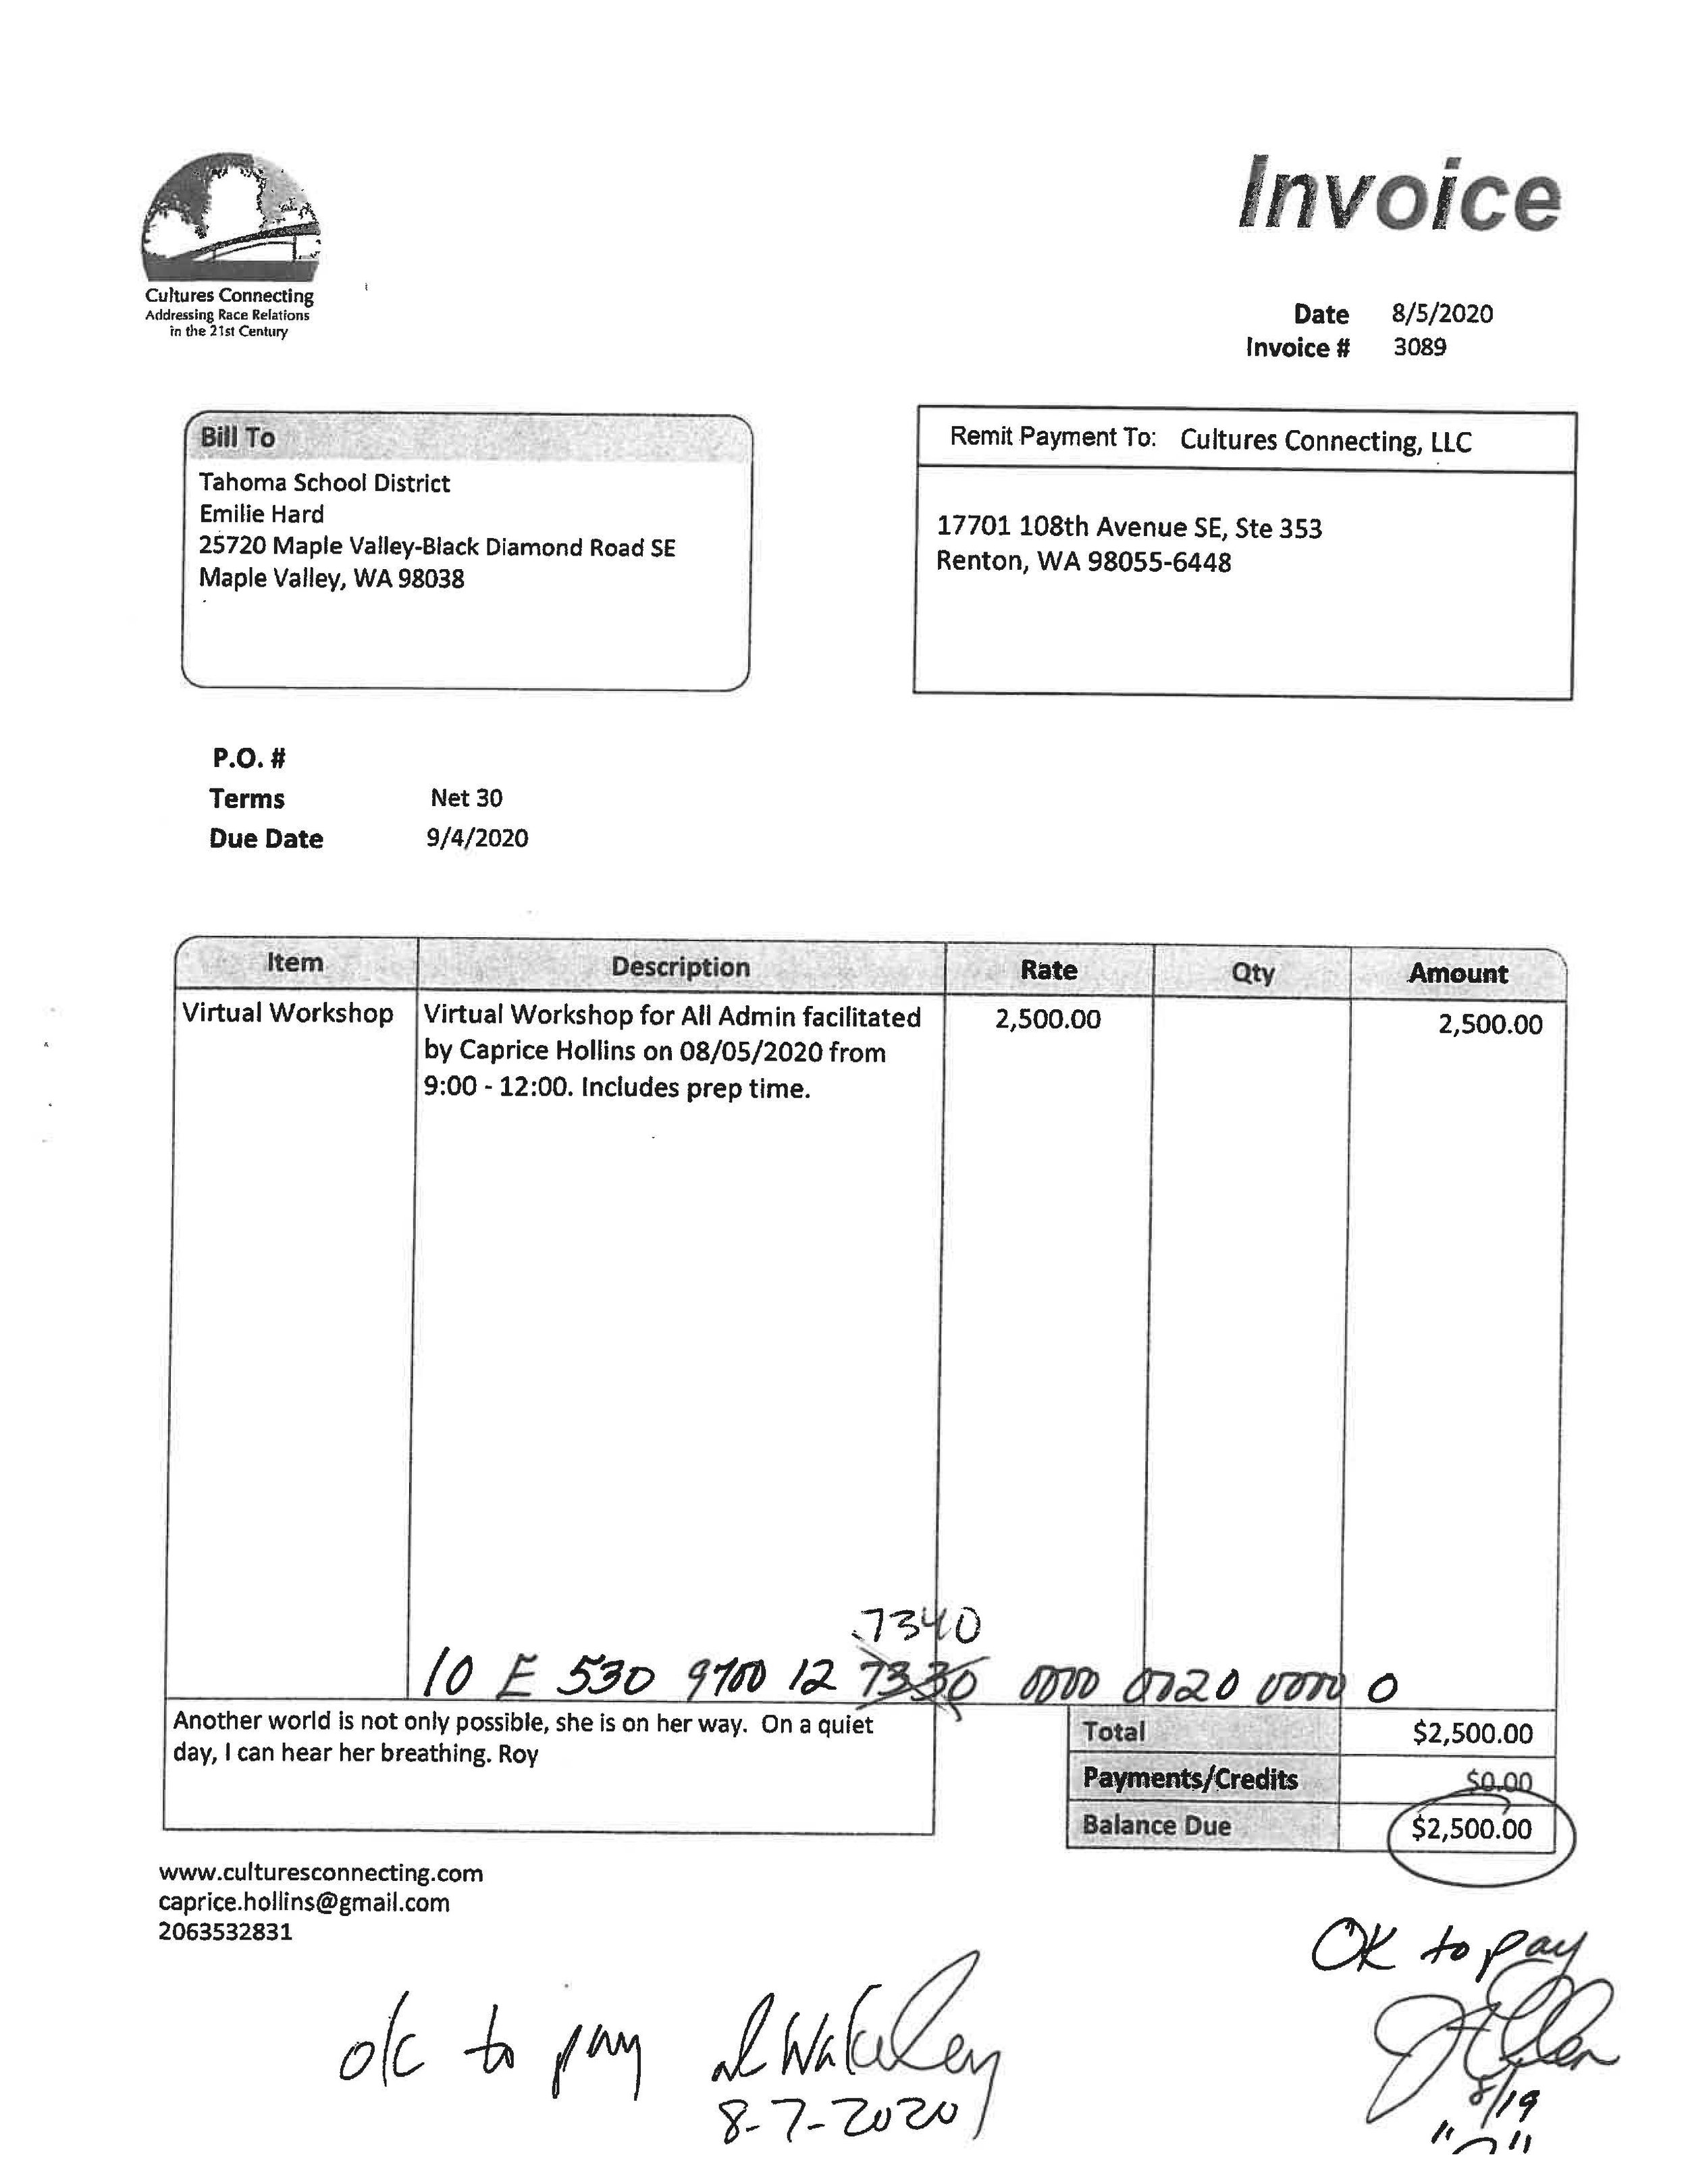 CH invoices_Page_01.jpg